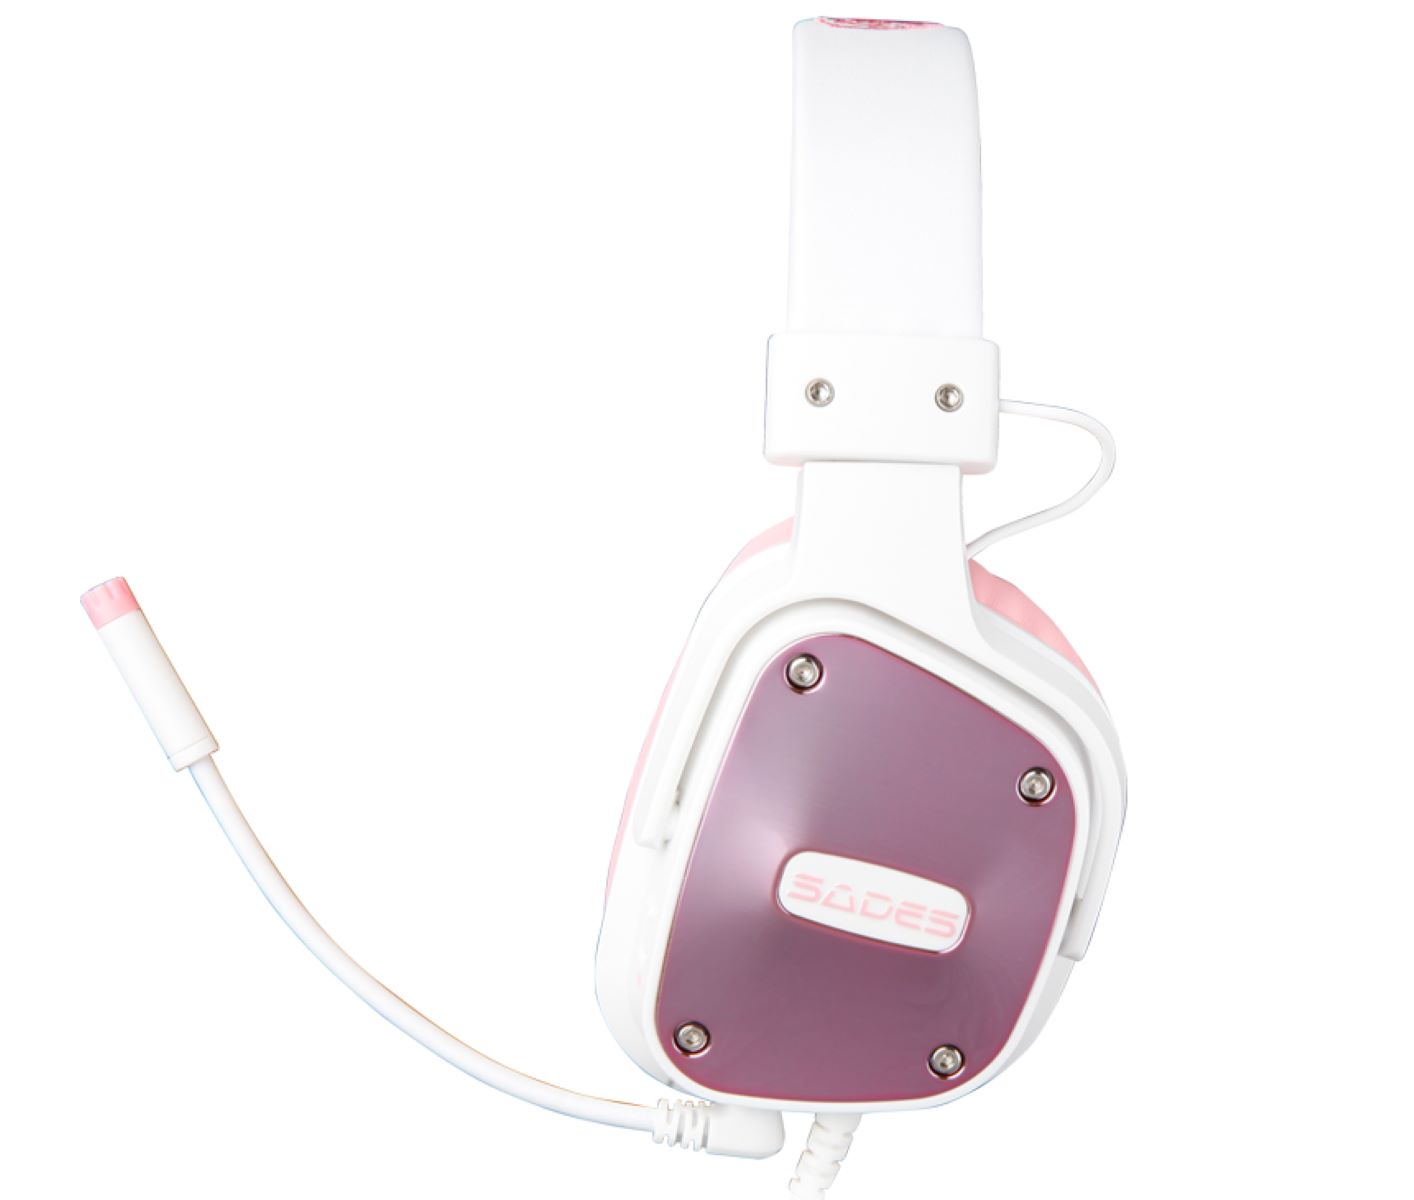 Over-ear Dpower SADES weiß/pink SA-722, Gaming-Headset